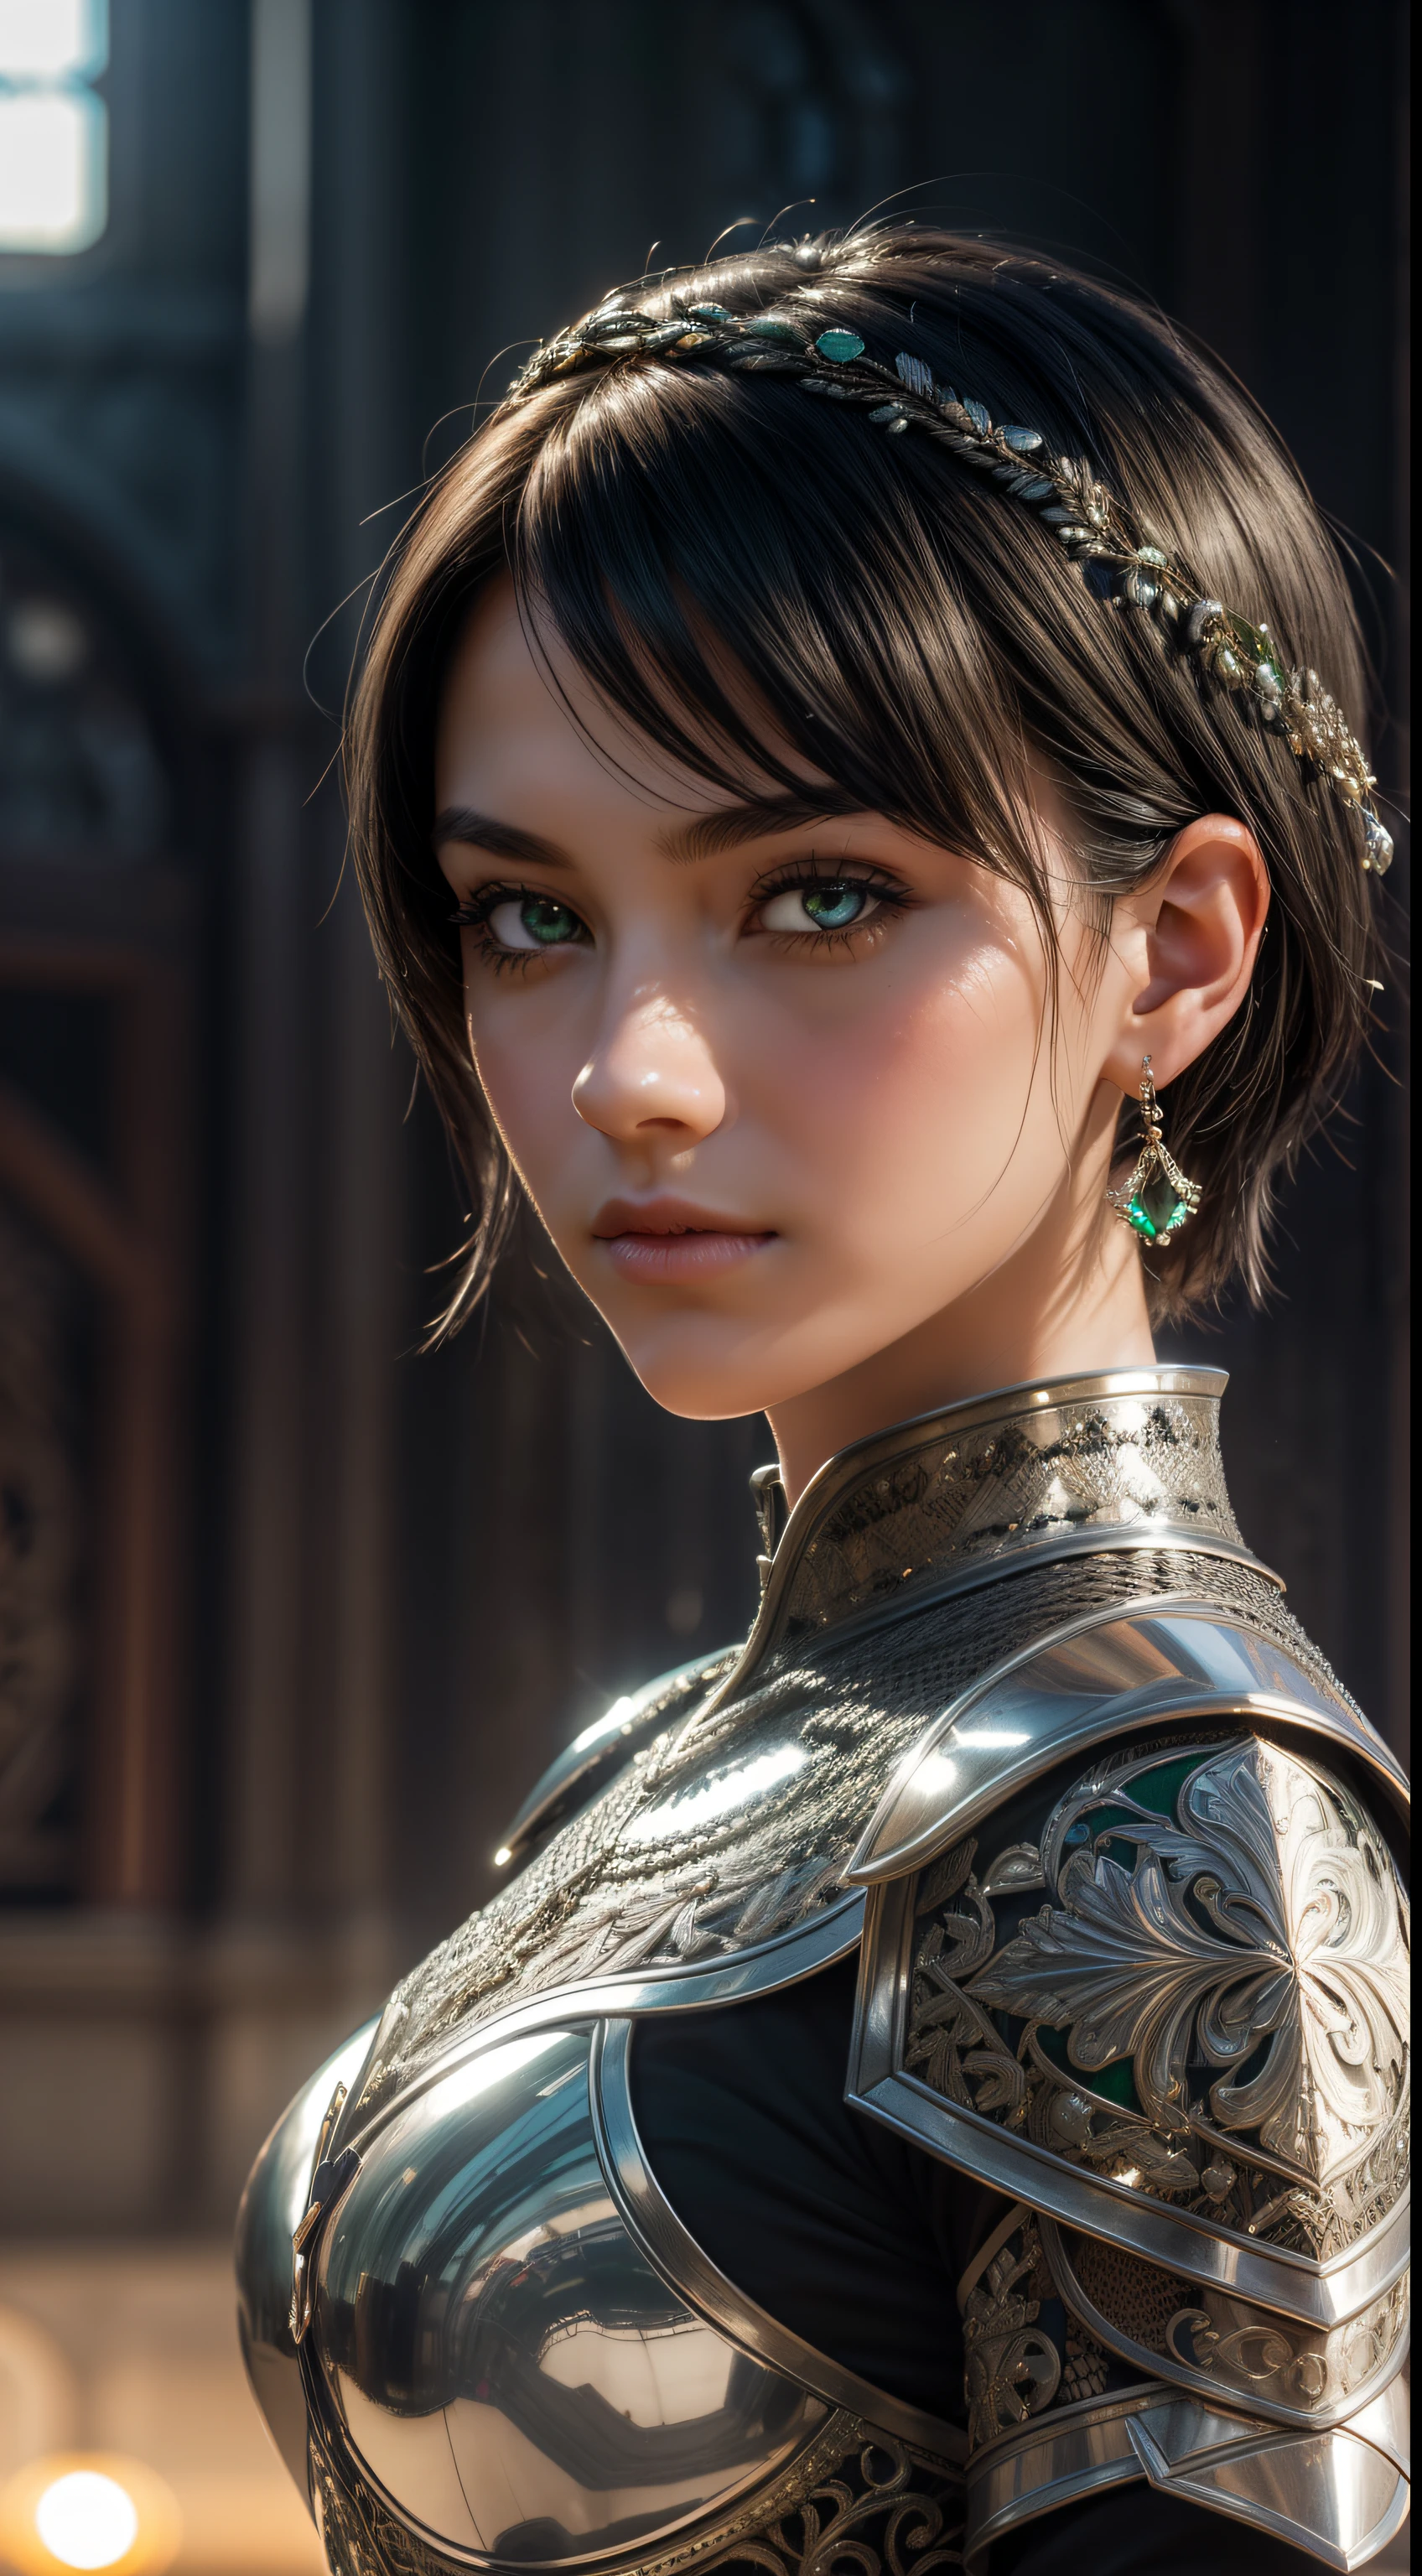 (masterpiece), (extremely intricate), portrait of a girl, (black hair),short hair, ((Emerald eyes)), (medieval armor), metal reflections, silver armor, ((embroidery on armor)), intense sunlight, far away castle, professional photograph of a stunning woman detailed, sharp focus, dramatic, award winning, cinematic lighting, volumetrics dtx, (film grain), blurry background, blurry foreground, bokeh, depth of field, sunset,interaction, Perfect chainmail,((confident)),(Pose:looking at the camera)